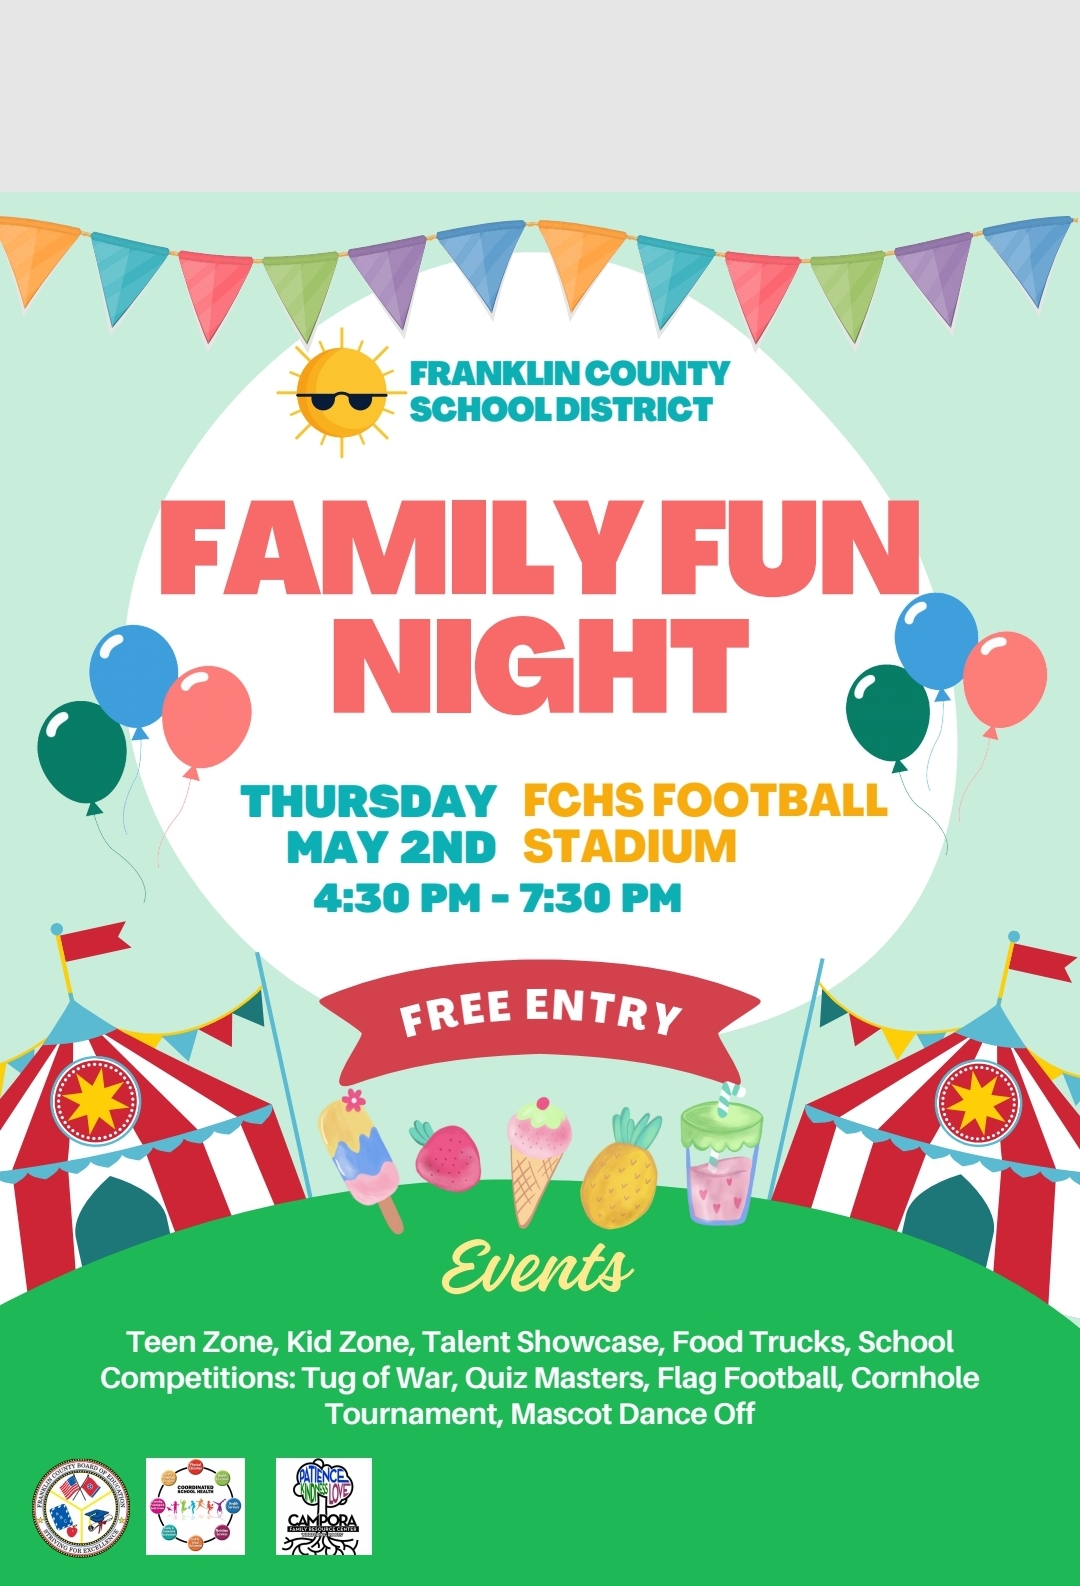 Franklin County School District Family Fun Night, Thursday May 2nd at the FCHS Football Stadium, Free Entry, Events include teen zone, kid zone, talent showcase, food trucks. School competitions include tug of war, quiz masters, flag football, cornhole tournament, mascot dance off.